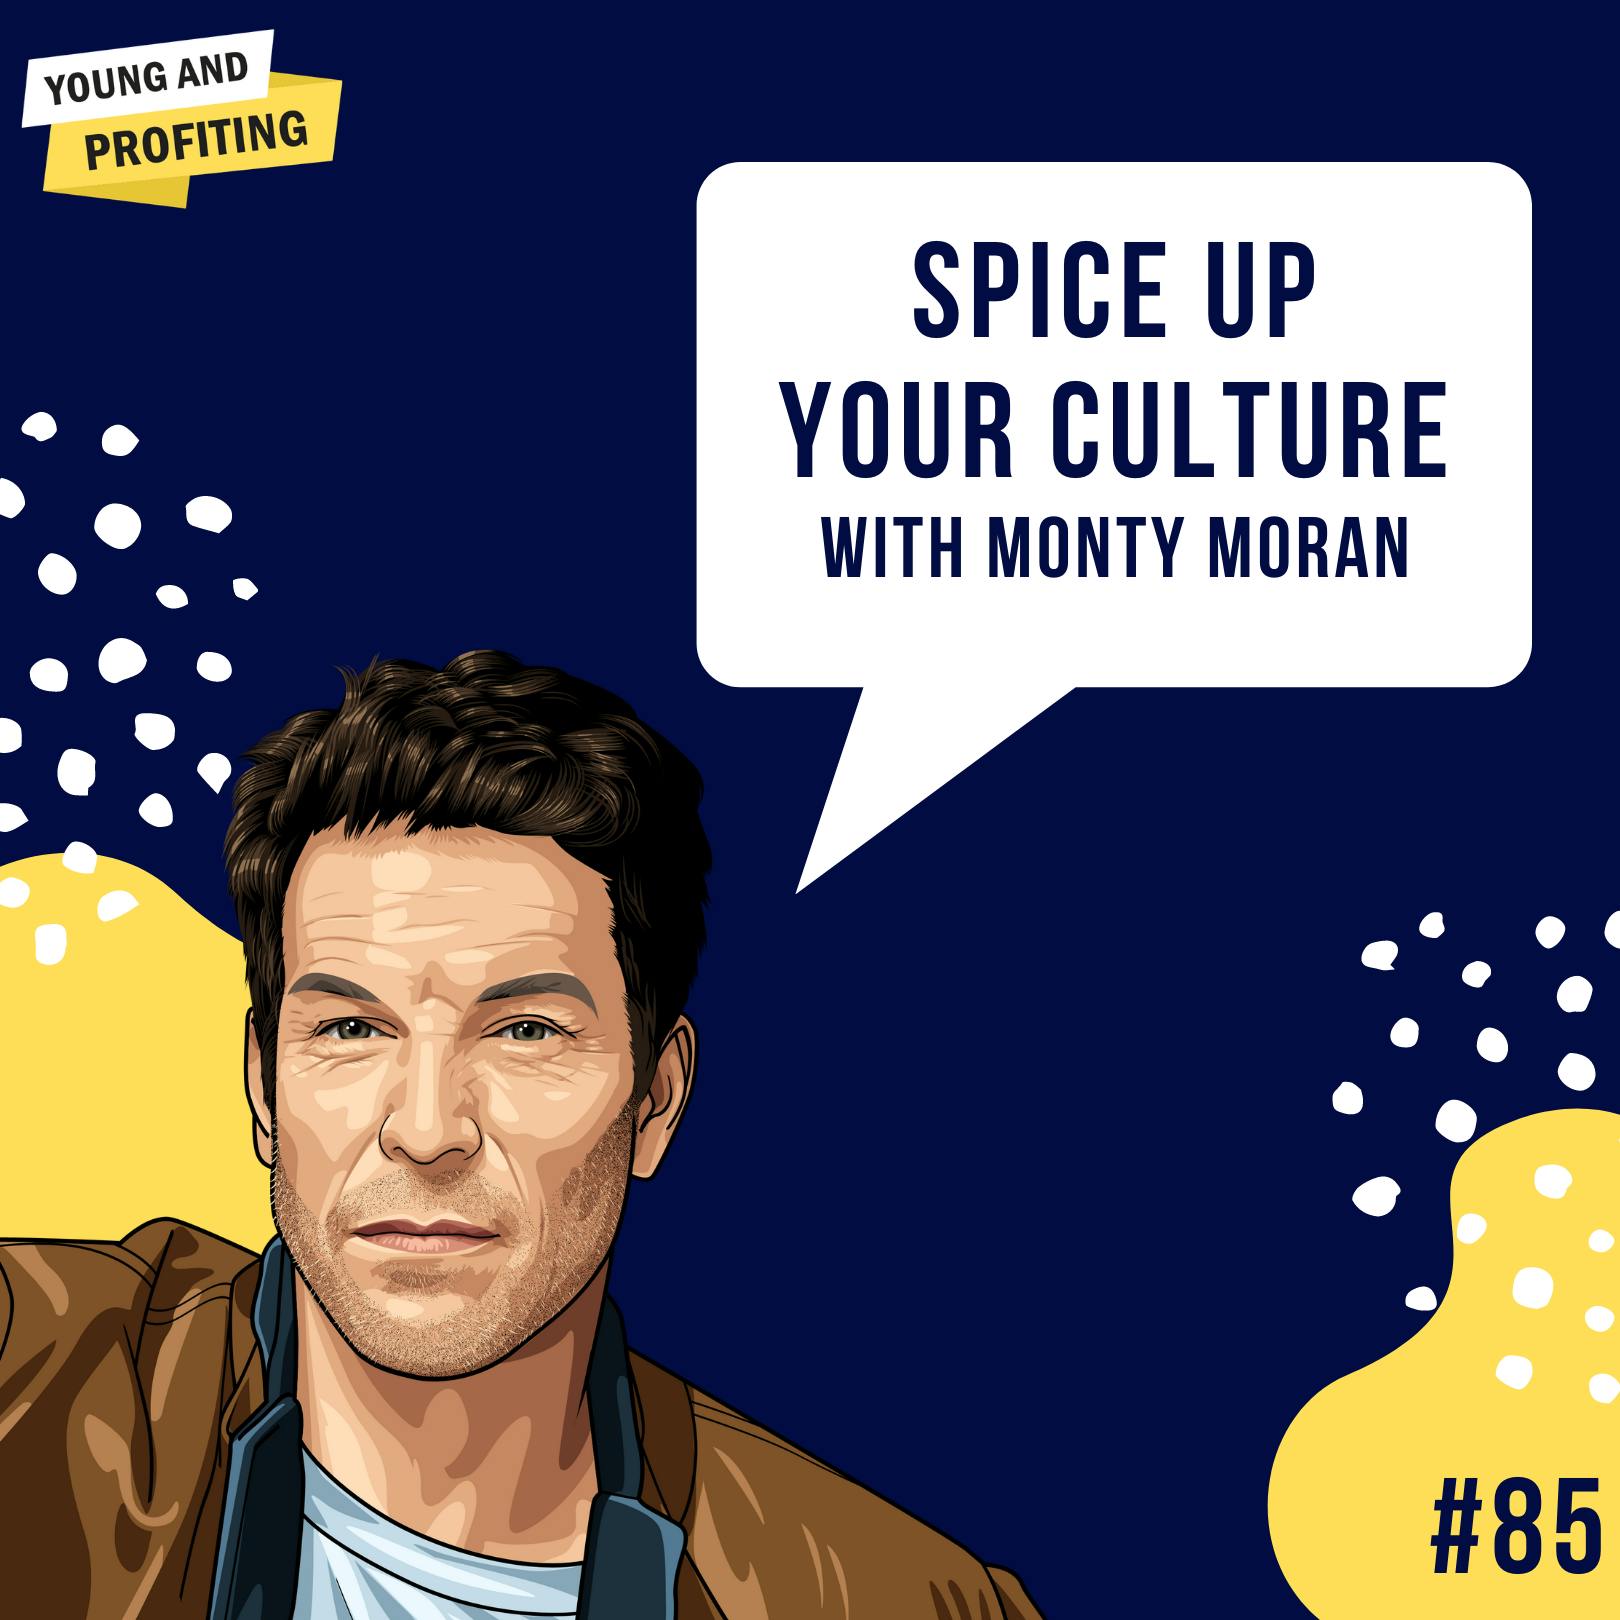 Monty Moran [Part 2]: Spice Up Your Company Culture | E85 by Hala Taha | YAP Media Network